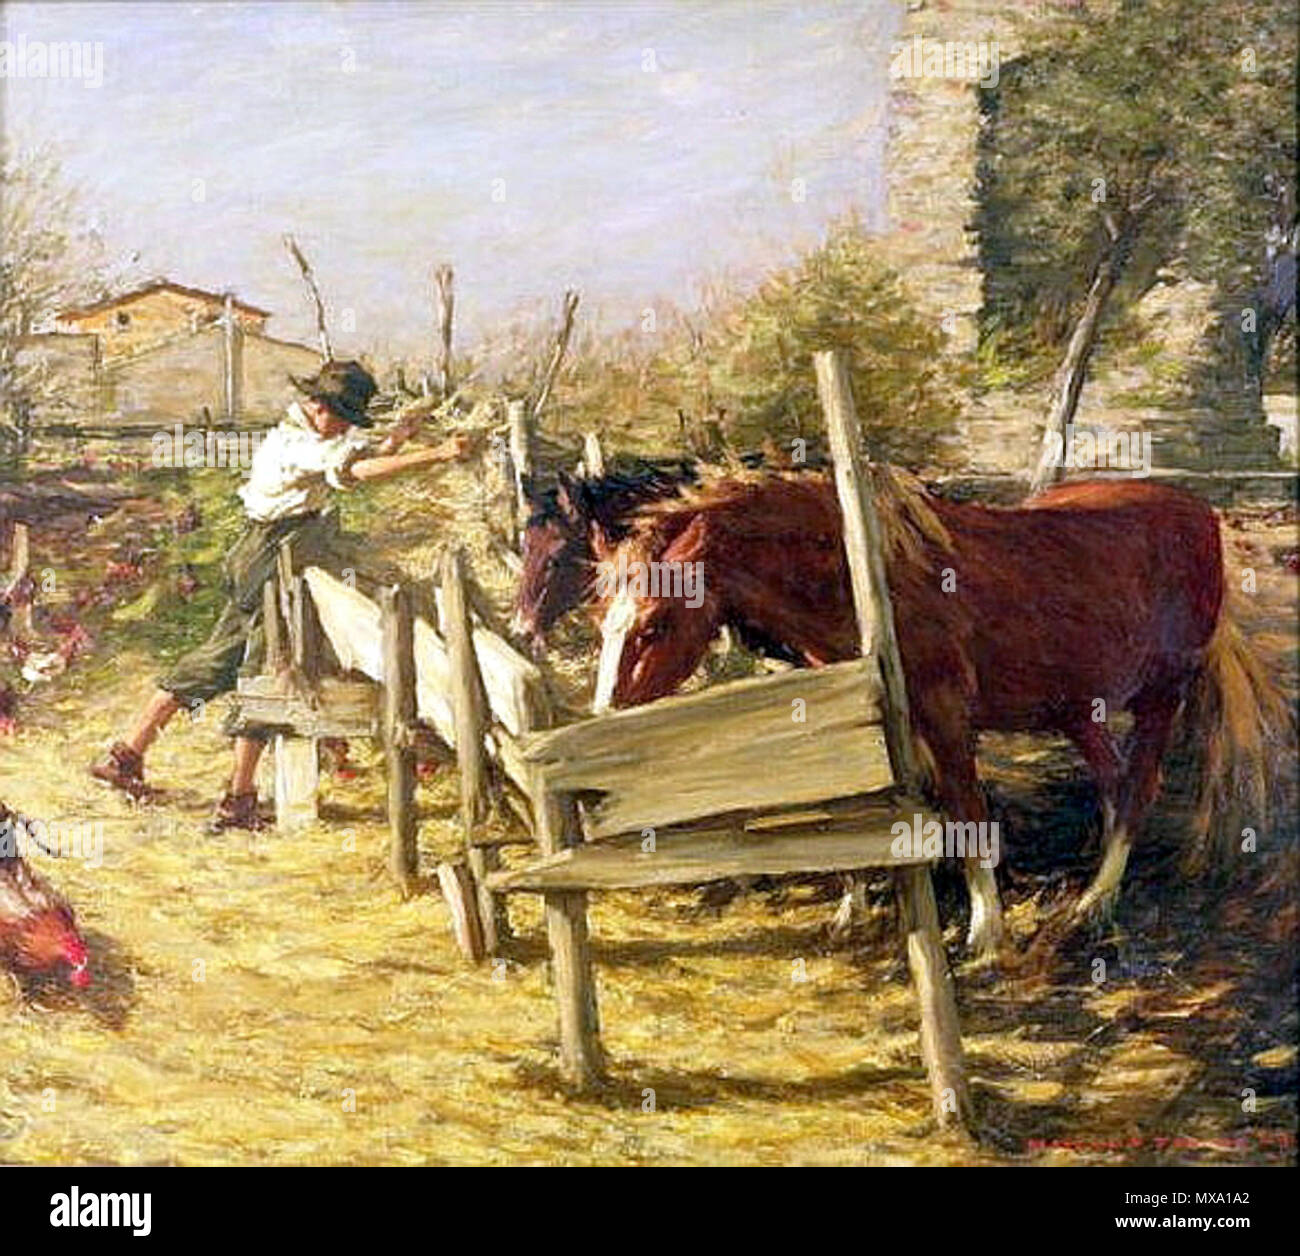 . The Appian Way . Unknown date.    Henry Herbert La Thangue  (1859–1929)     Alternative names Henry Herbert LaThangue; Henry La Thangue; Henry Herbert la Thangue; Henry Herbert Lathangue; La Thangue  Description English painter Realist painter and associated with the Newlyn School  Date of birth/death 19 September 1859 21 December 1929  Location of birth/death London London  Work location Bretagne, London, Category:Norfolk  Authority control  : Q1606851 VIAF: 25469415 ISNI: 0000 0000 6681 1384 ULAN: 500004645 LCCN: n89654016 WGA: LA THANGUE, Henry Herbert WorldCat 274 Henry Herbert La Thangu Stock Photo